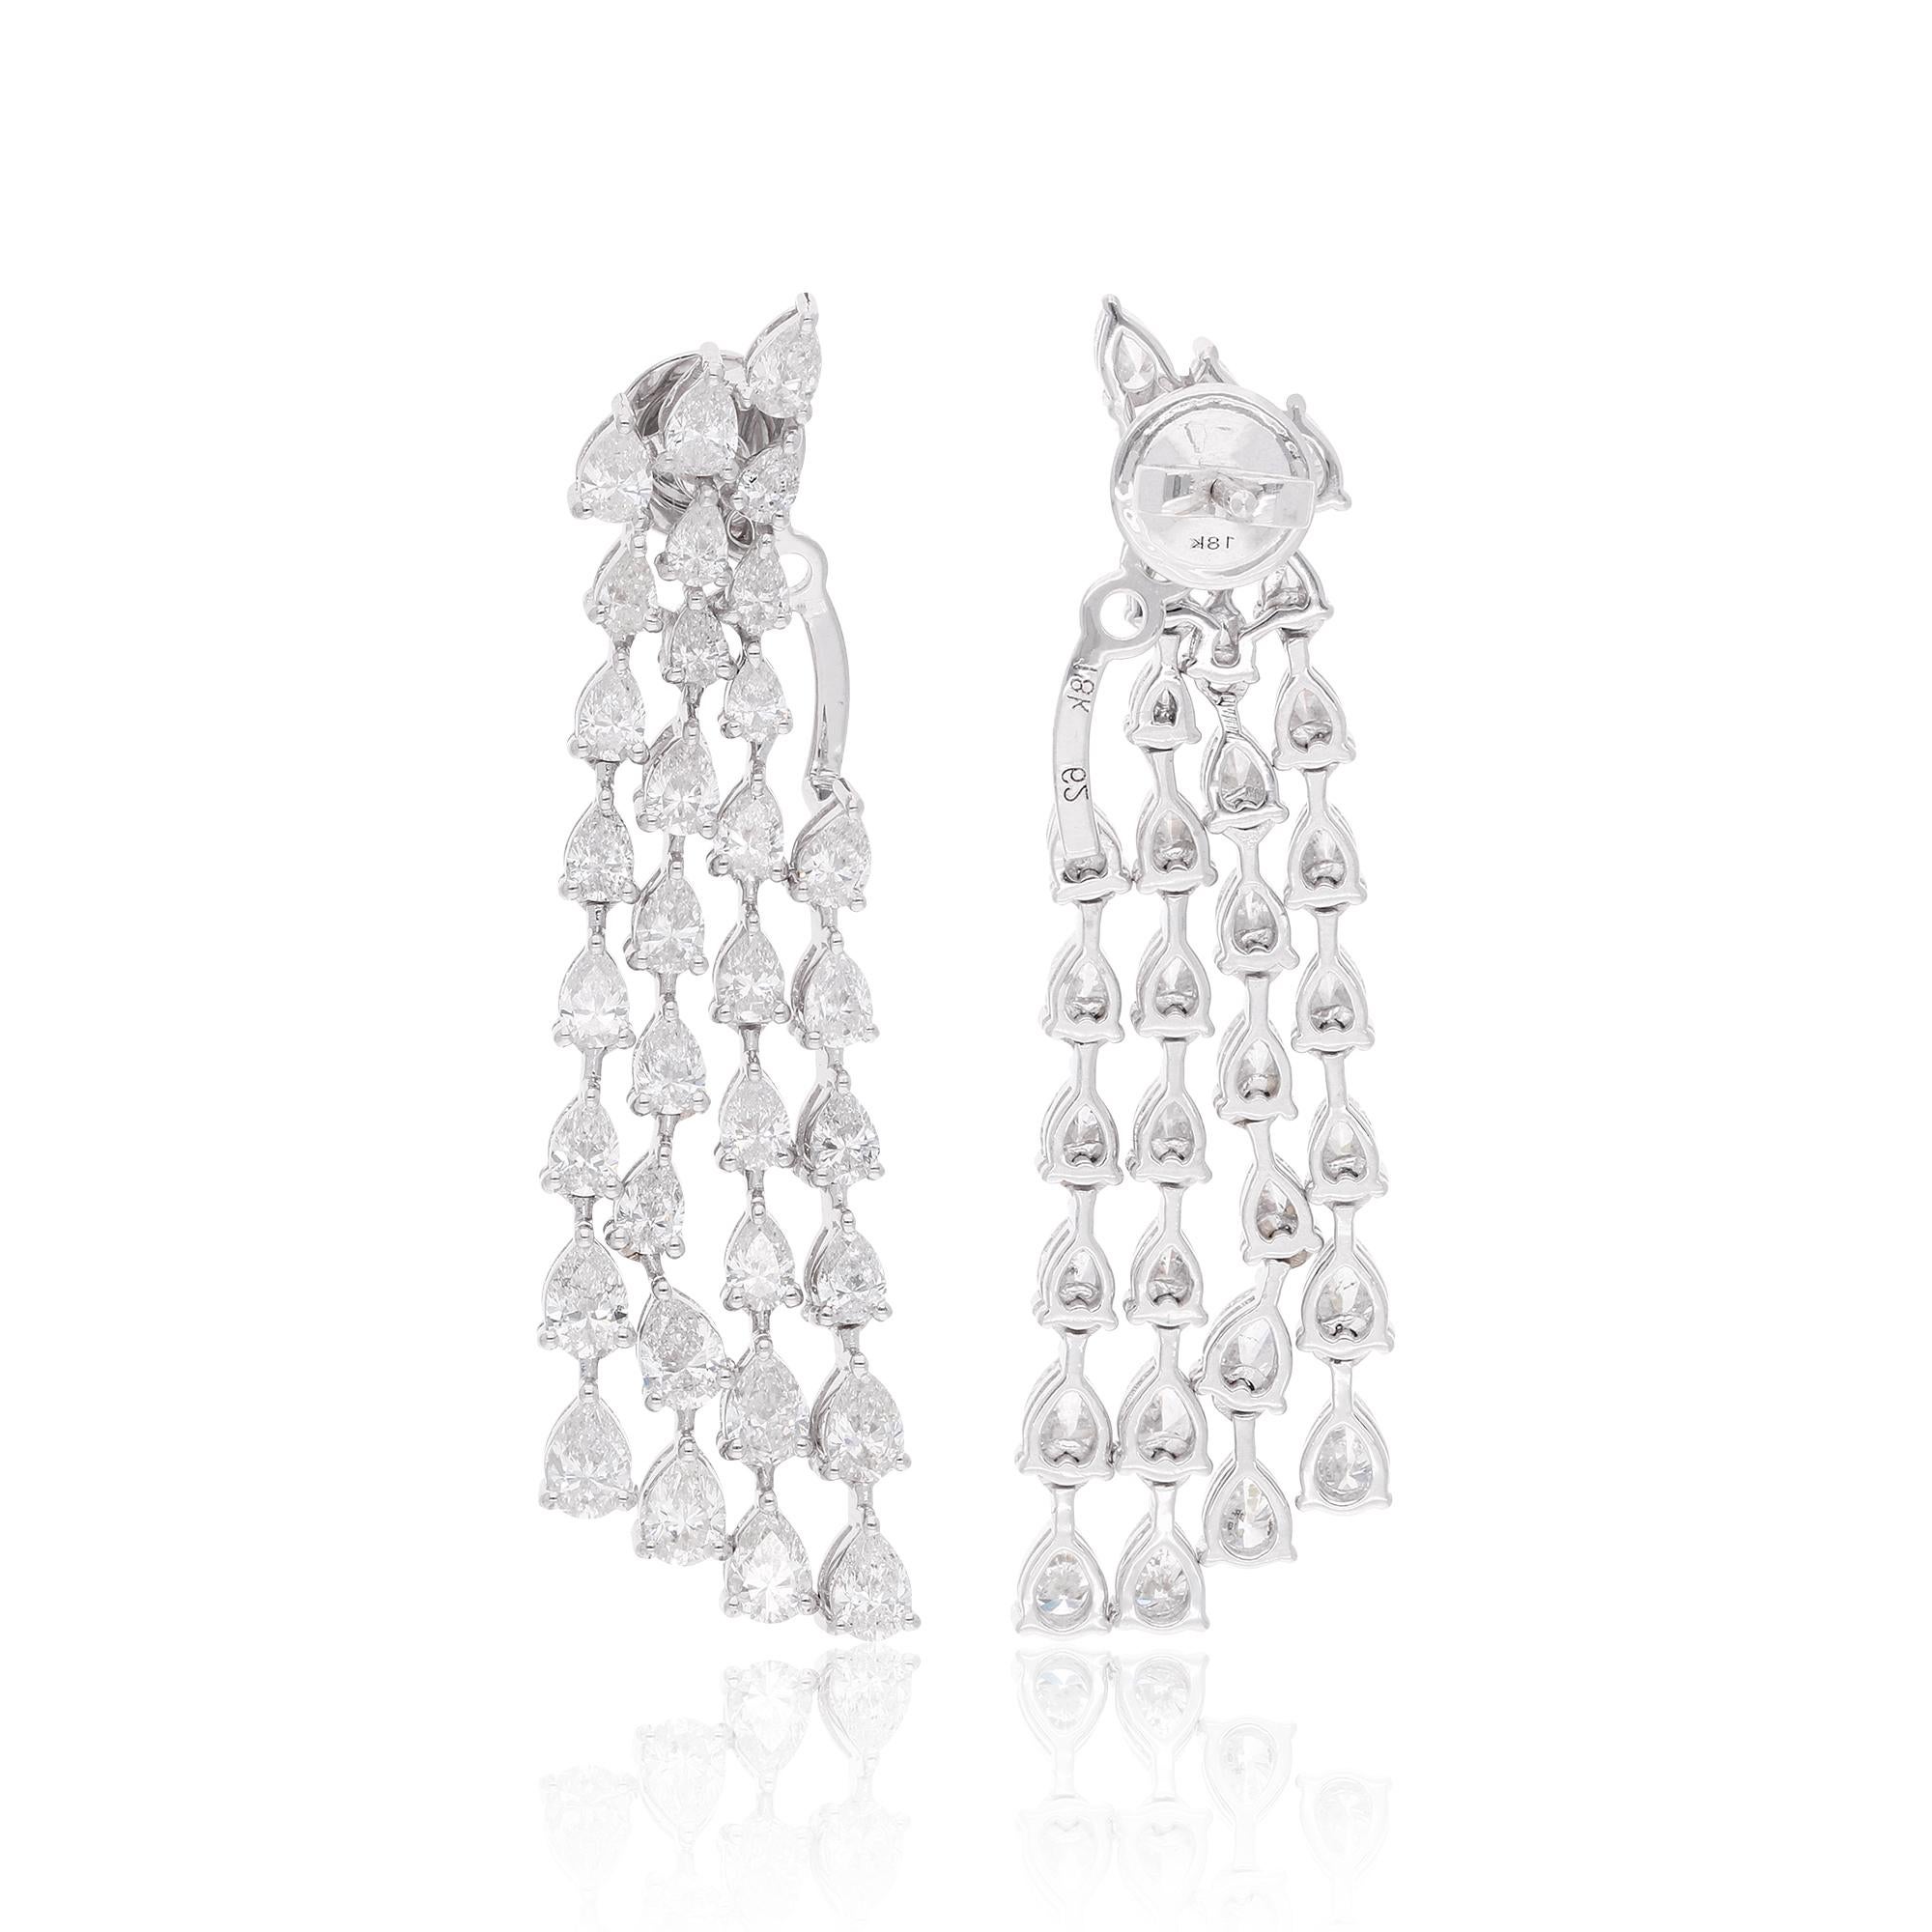 It sounds like you're describing a pair of diamond jacket earrings made from 18 karat white gold, featuring pear-shaped diamonds with a total weight of 6.05 carats. This type of jewelry is considered fine jewelry due to the high-quality materials